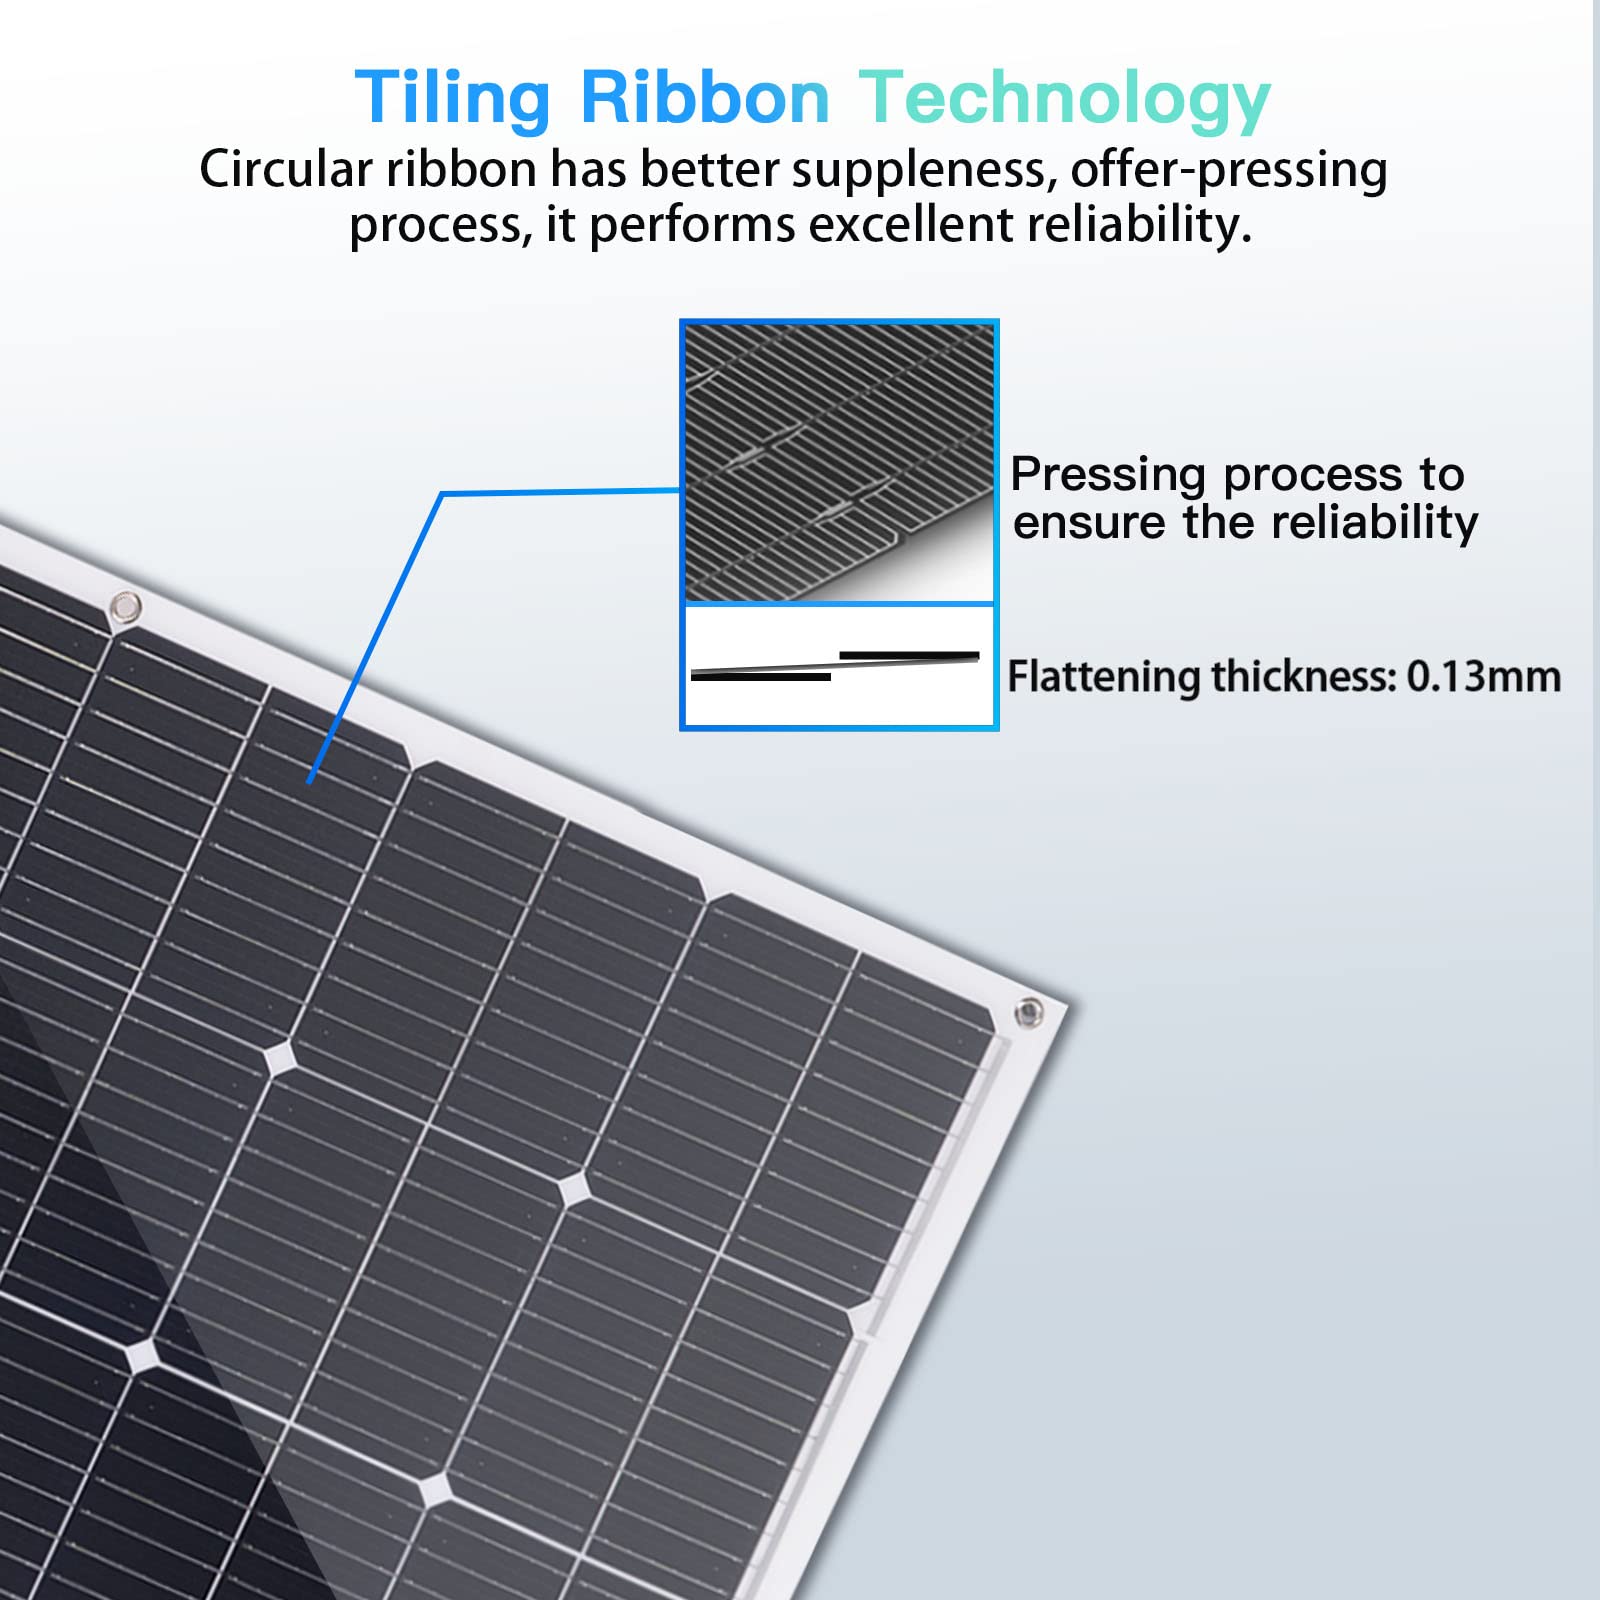 Flexible Solar Panel 100W/12V, Monocrystalline Solar Panels, 23% High Convert, IP68 Waterproof and Lightweight Off-Grid Solar Power System Charger for Marine Camping RV Cabin Van Car Uneven Surfaces